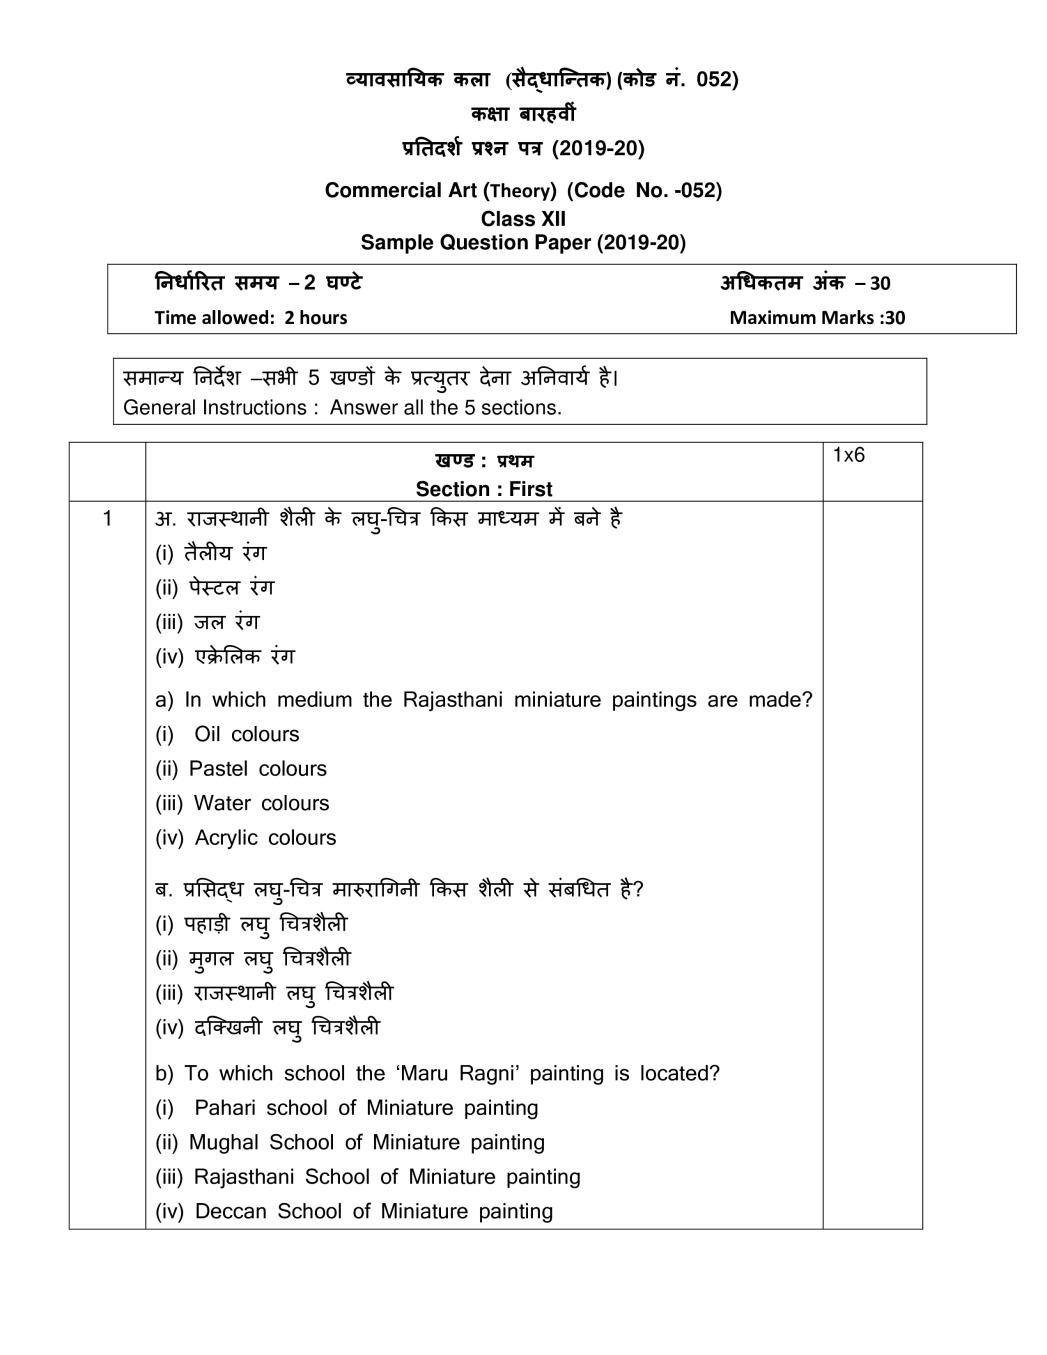 CBSE Class 12 Sample Paper 2020 for Commercial Arts - Page 1